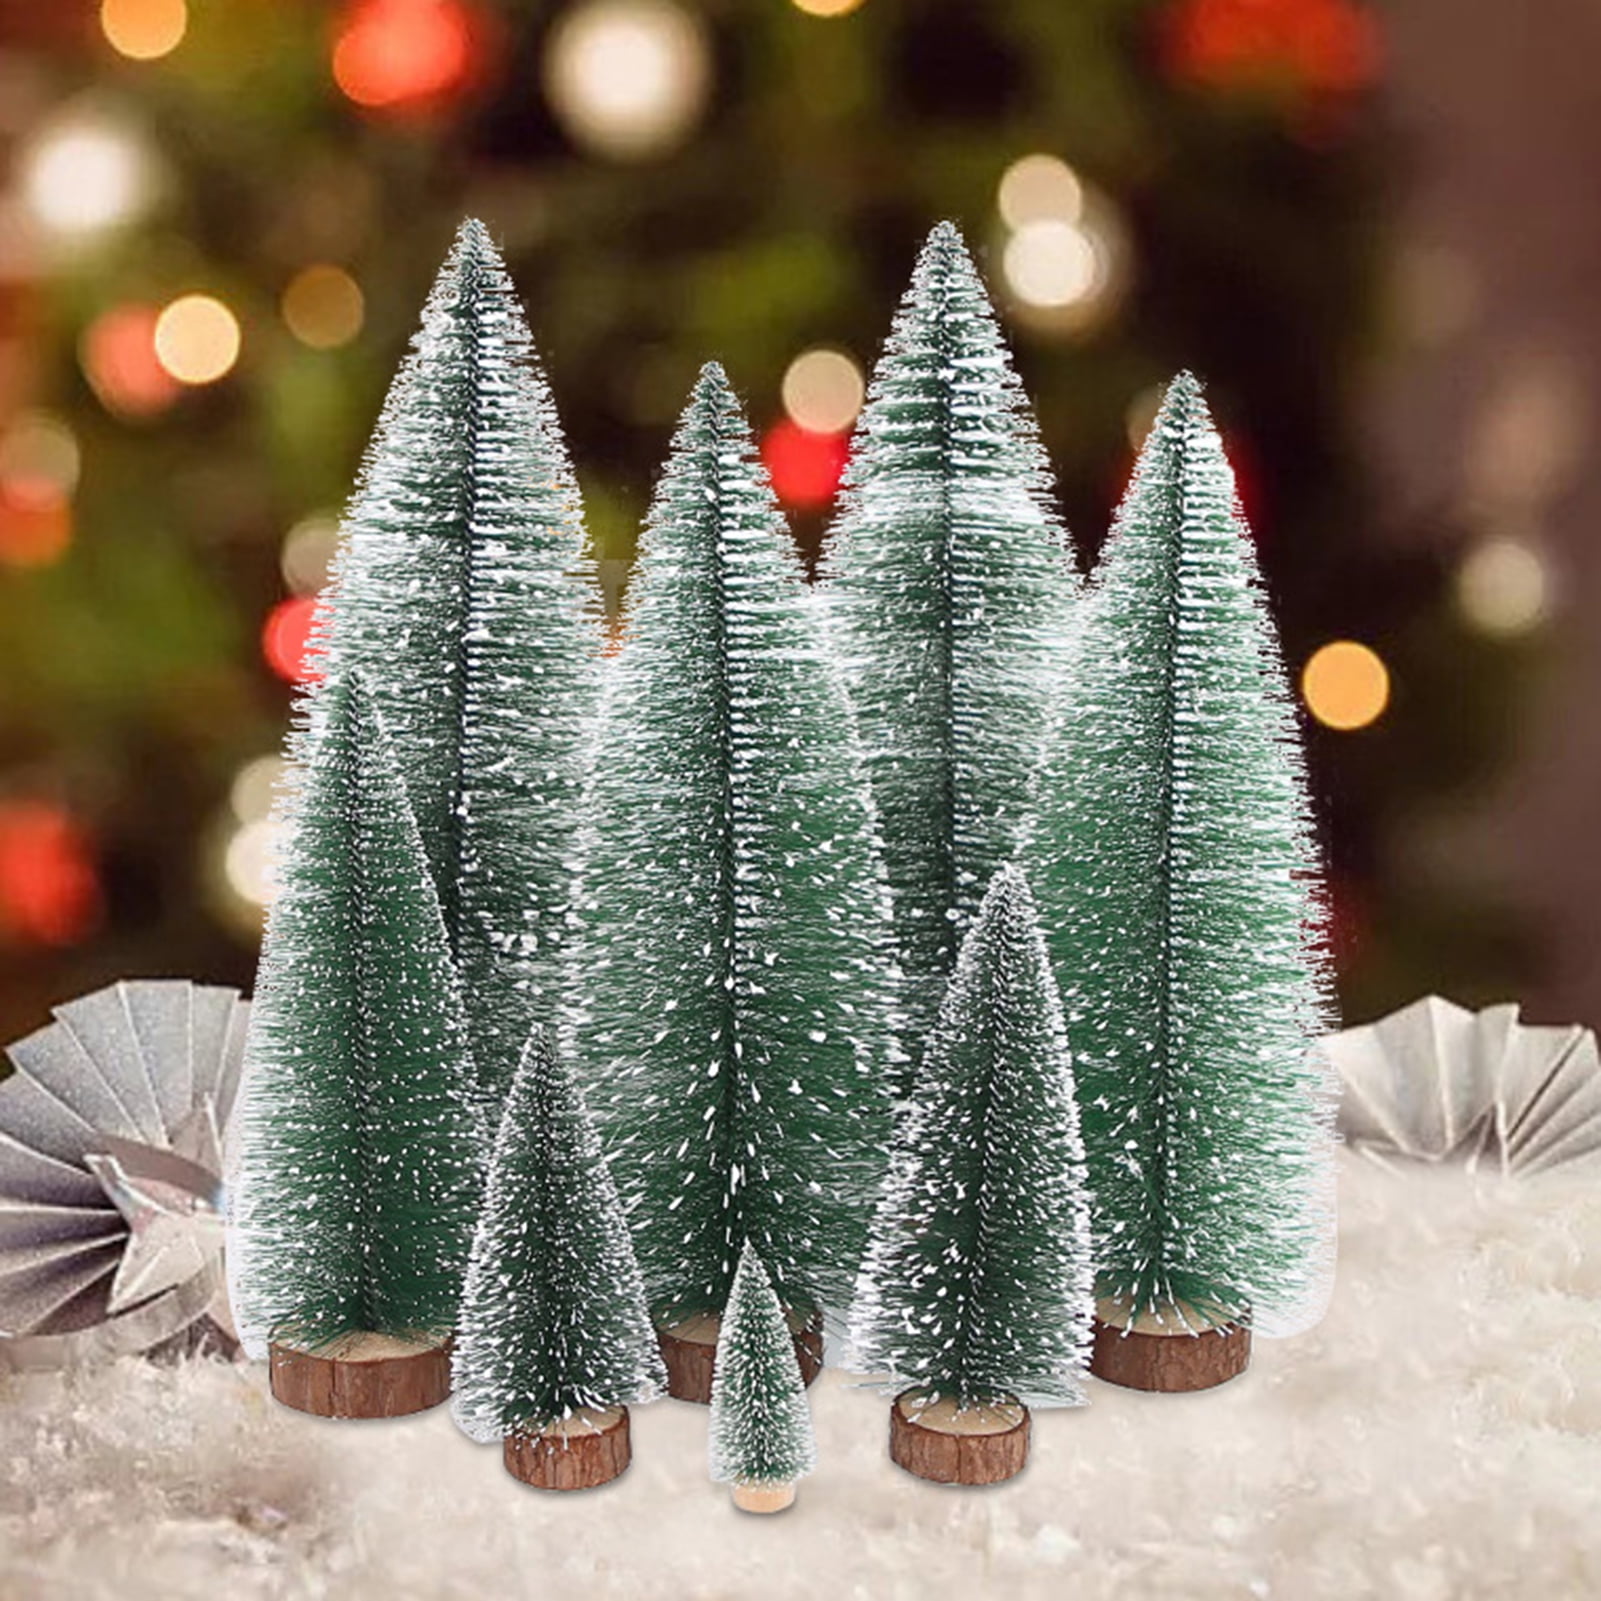 Home Decor Artificial Christmas Tree Accessories Christmas Decoration  Simulated Red Fruit Indoor Christmas Tree Ornaments Gifts